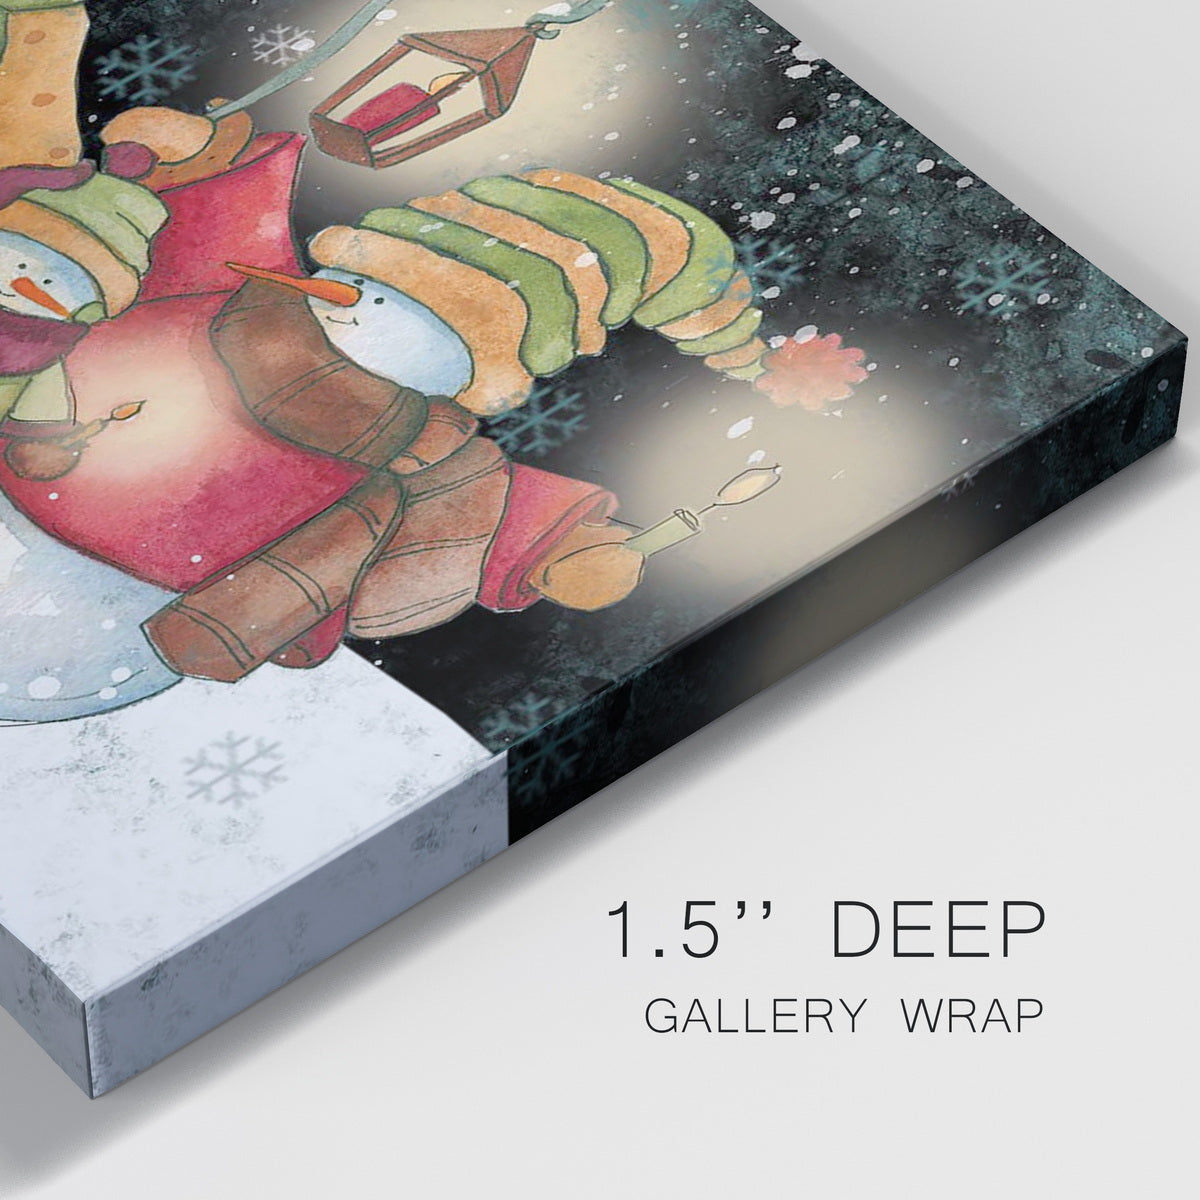 Christmas Lineup Premium Gallery Wrapped Canvas - Ready to Hang